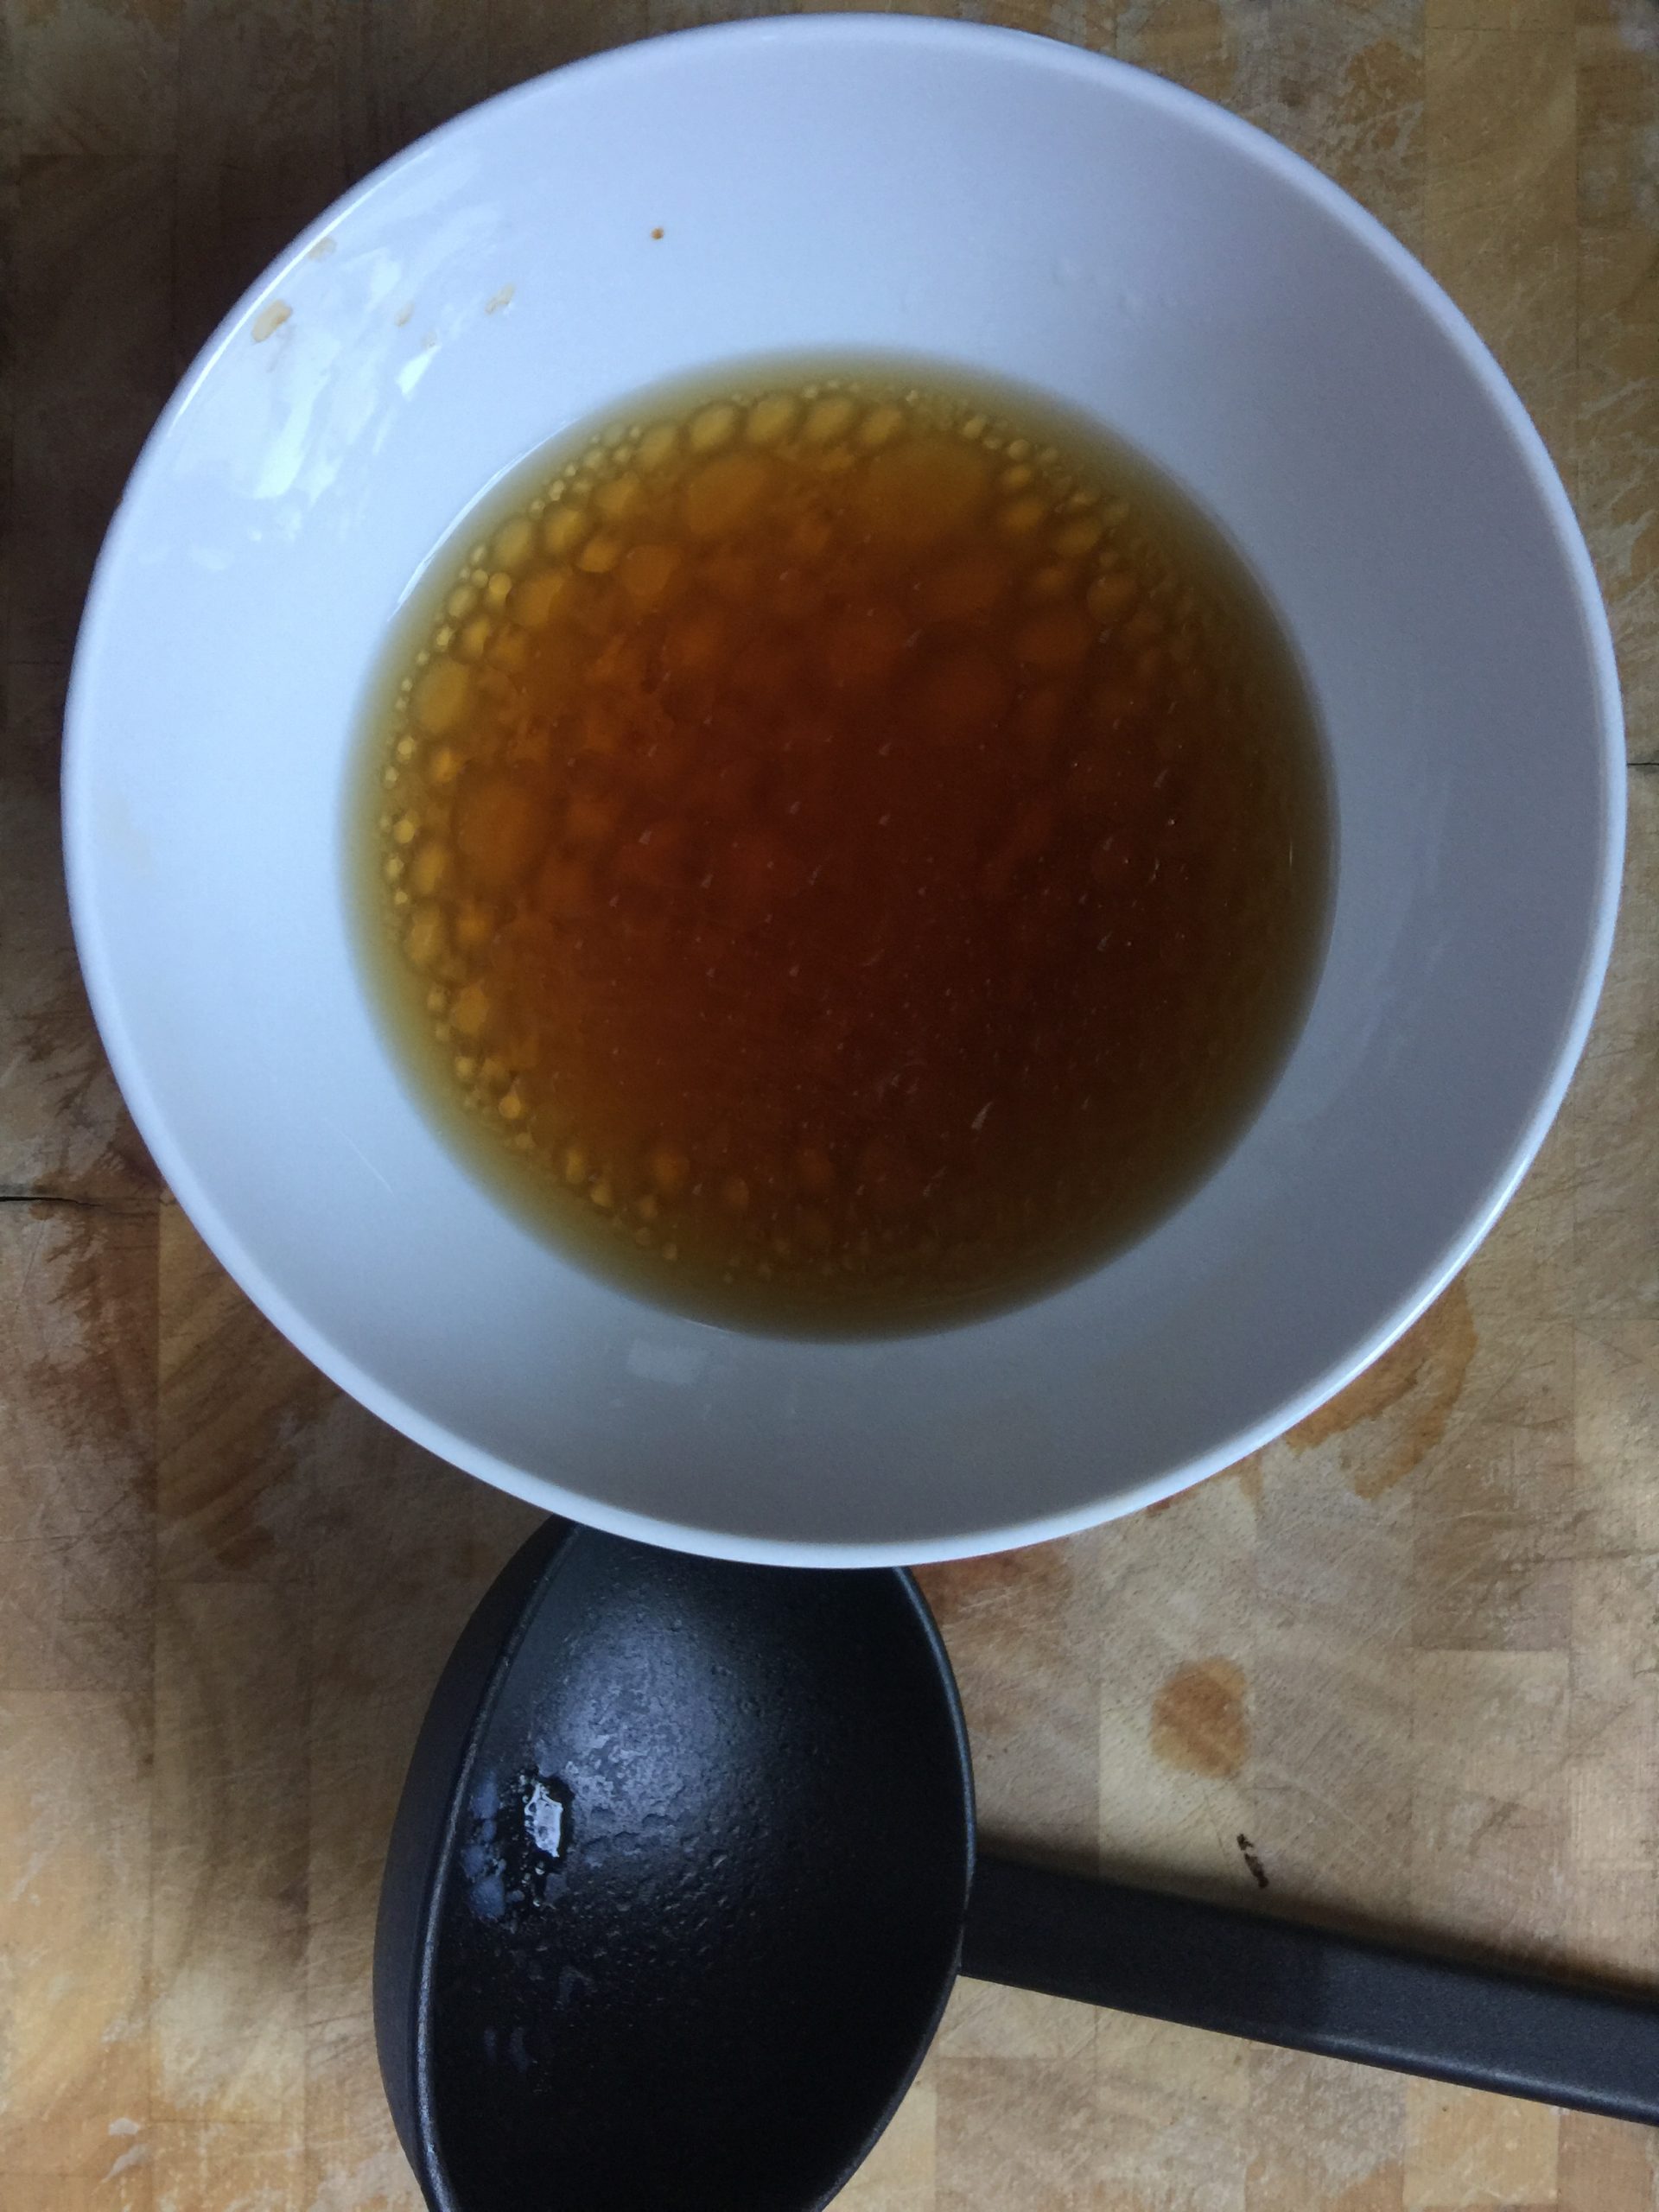 A white bowl of 1 tablespoon of soy sauce and sesame oil, diluted with one soup spoon of the boiling water, the soup spoon lying on the side.